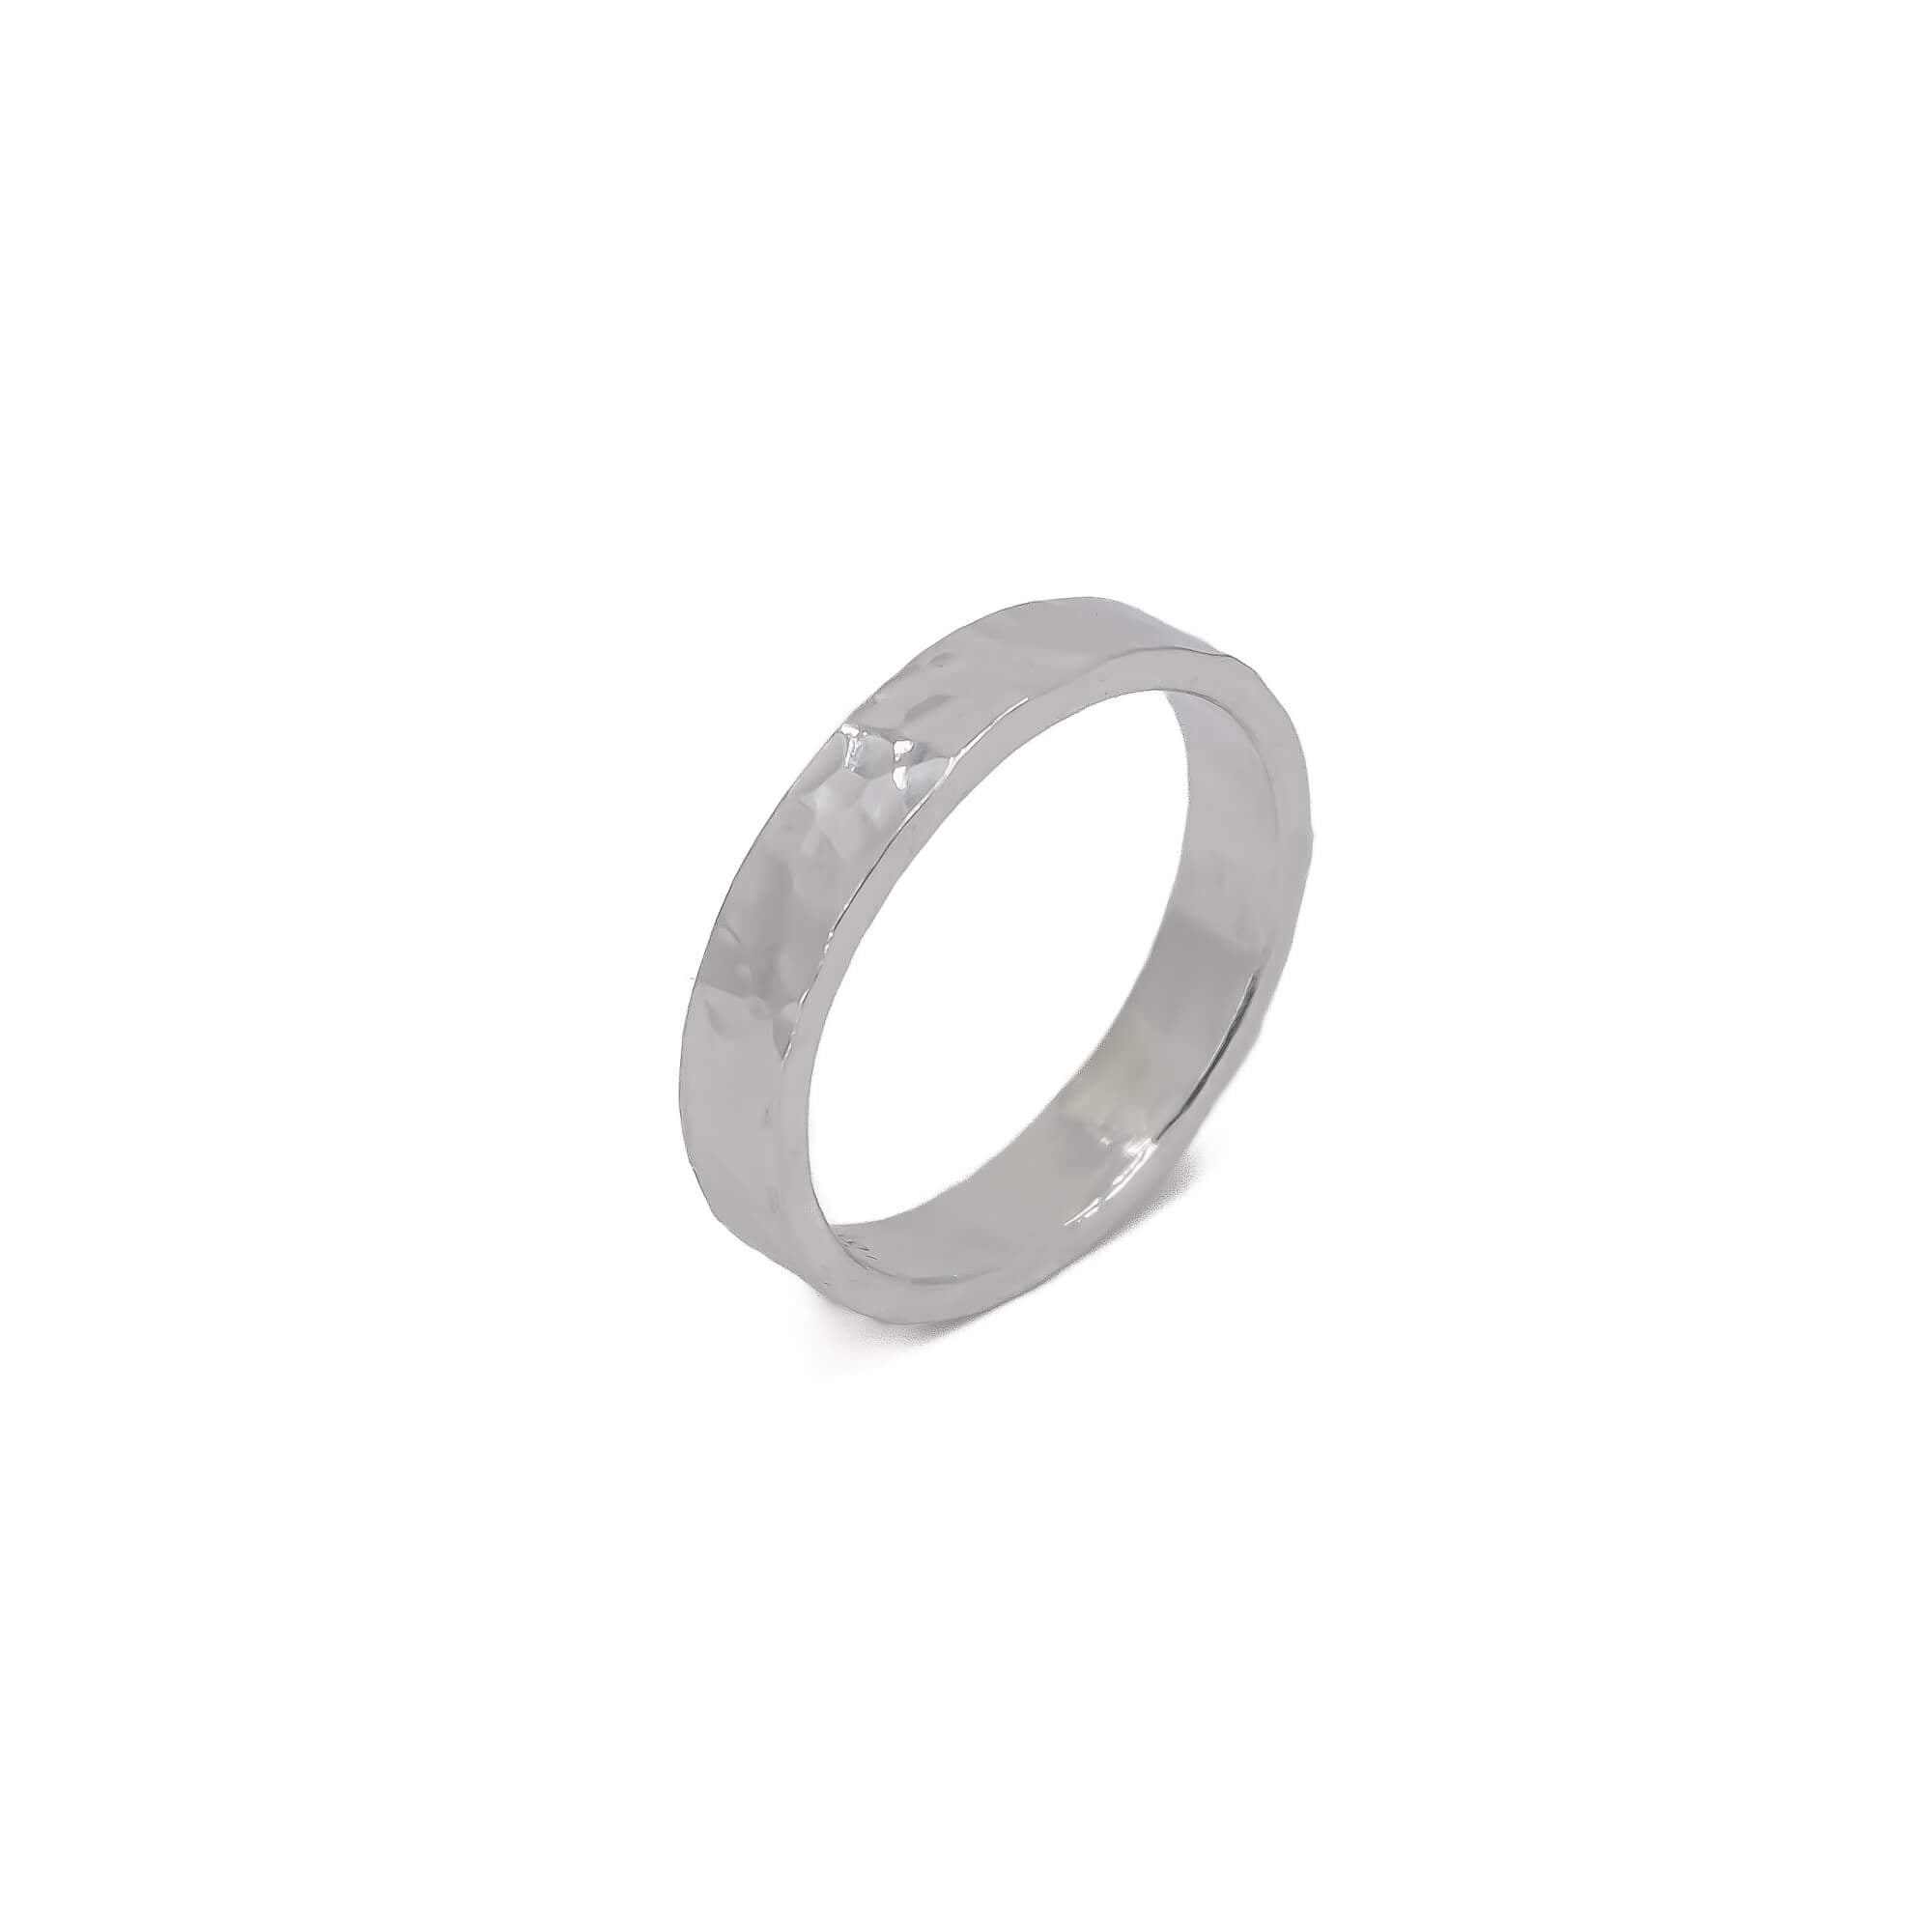 Rustic 4mm sterling silver ring band